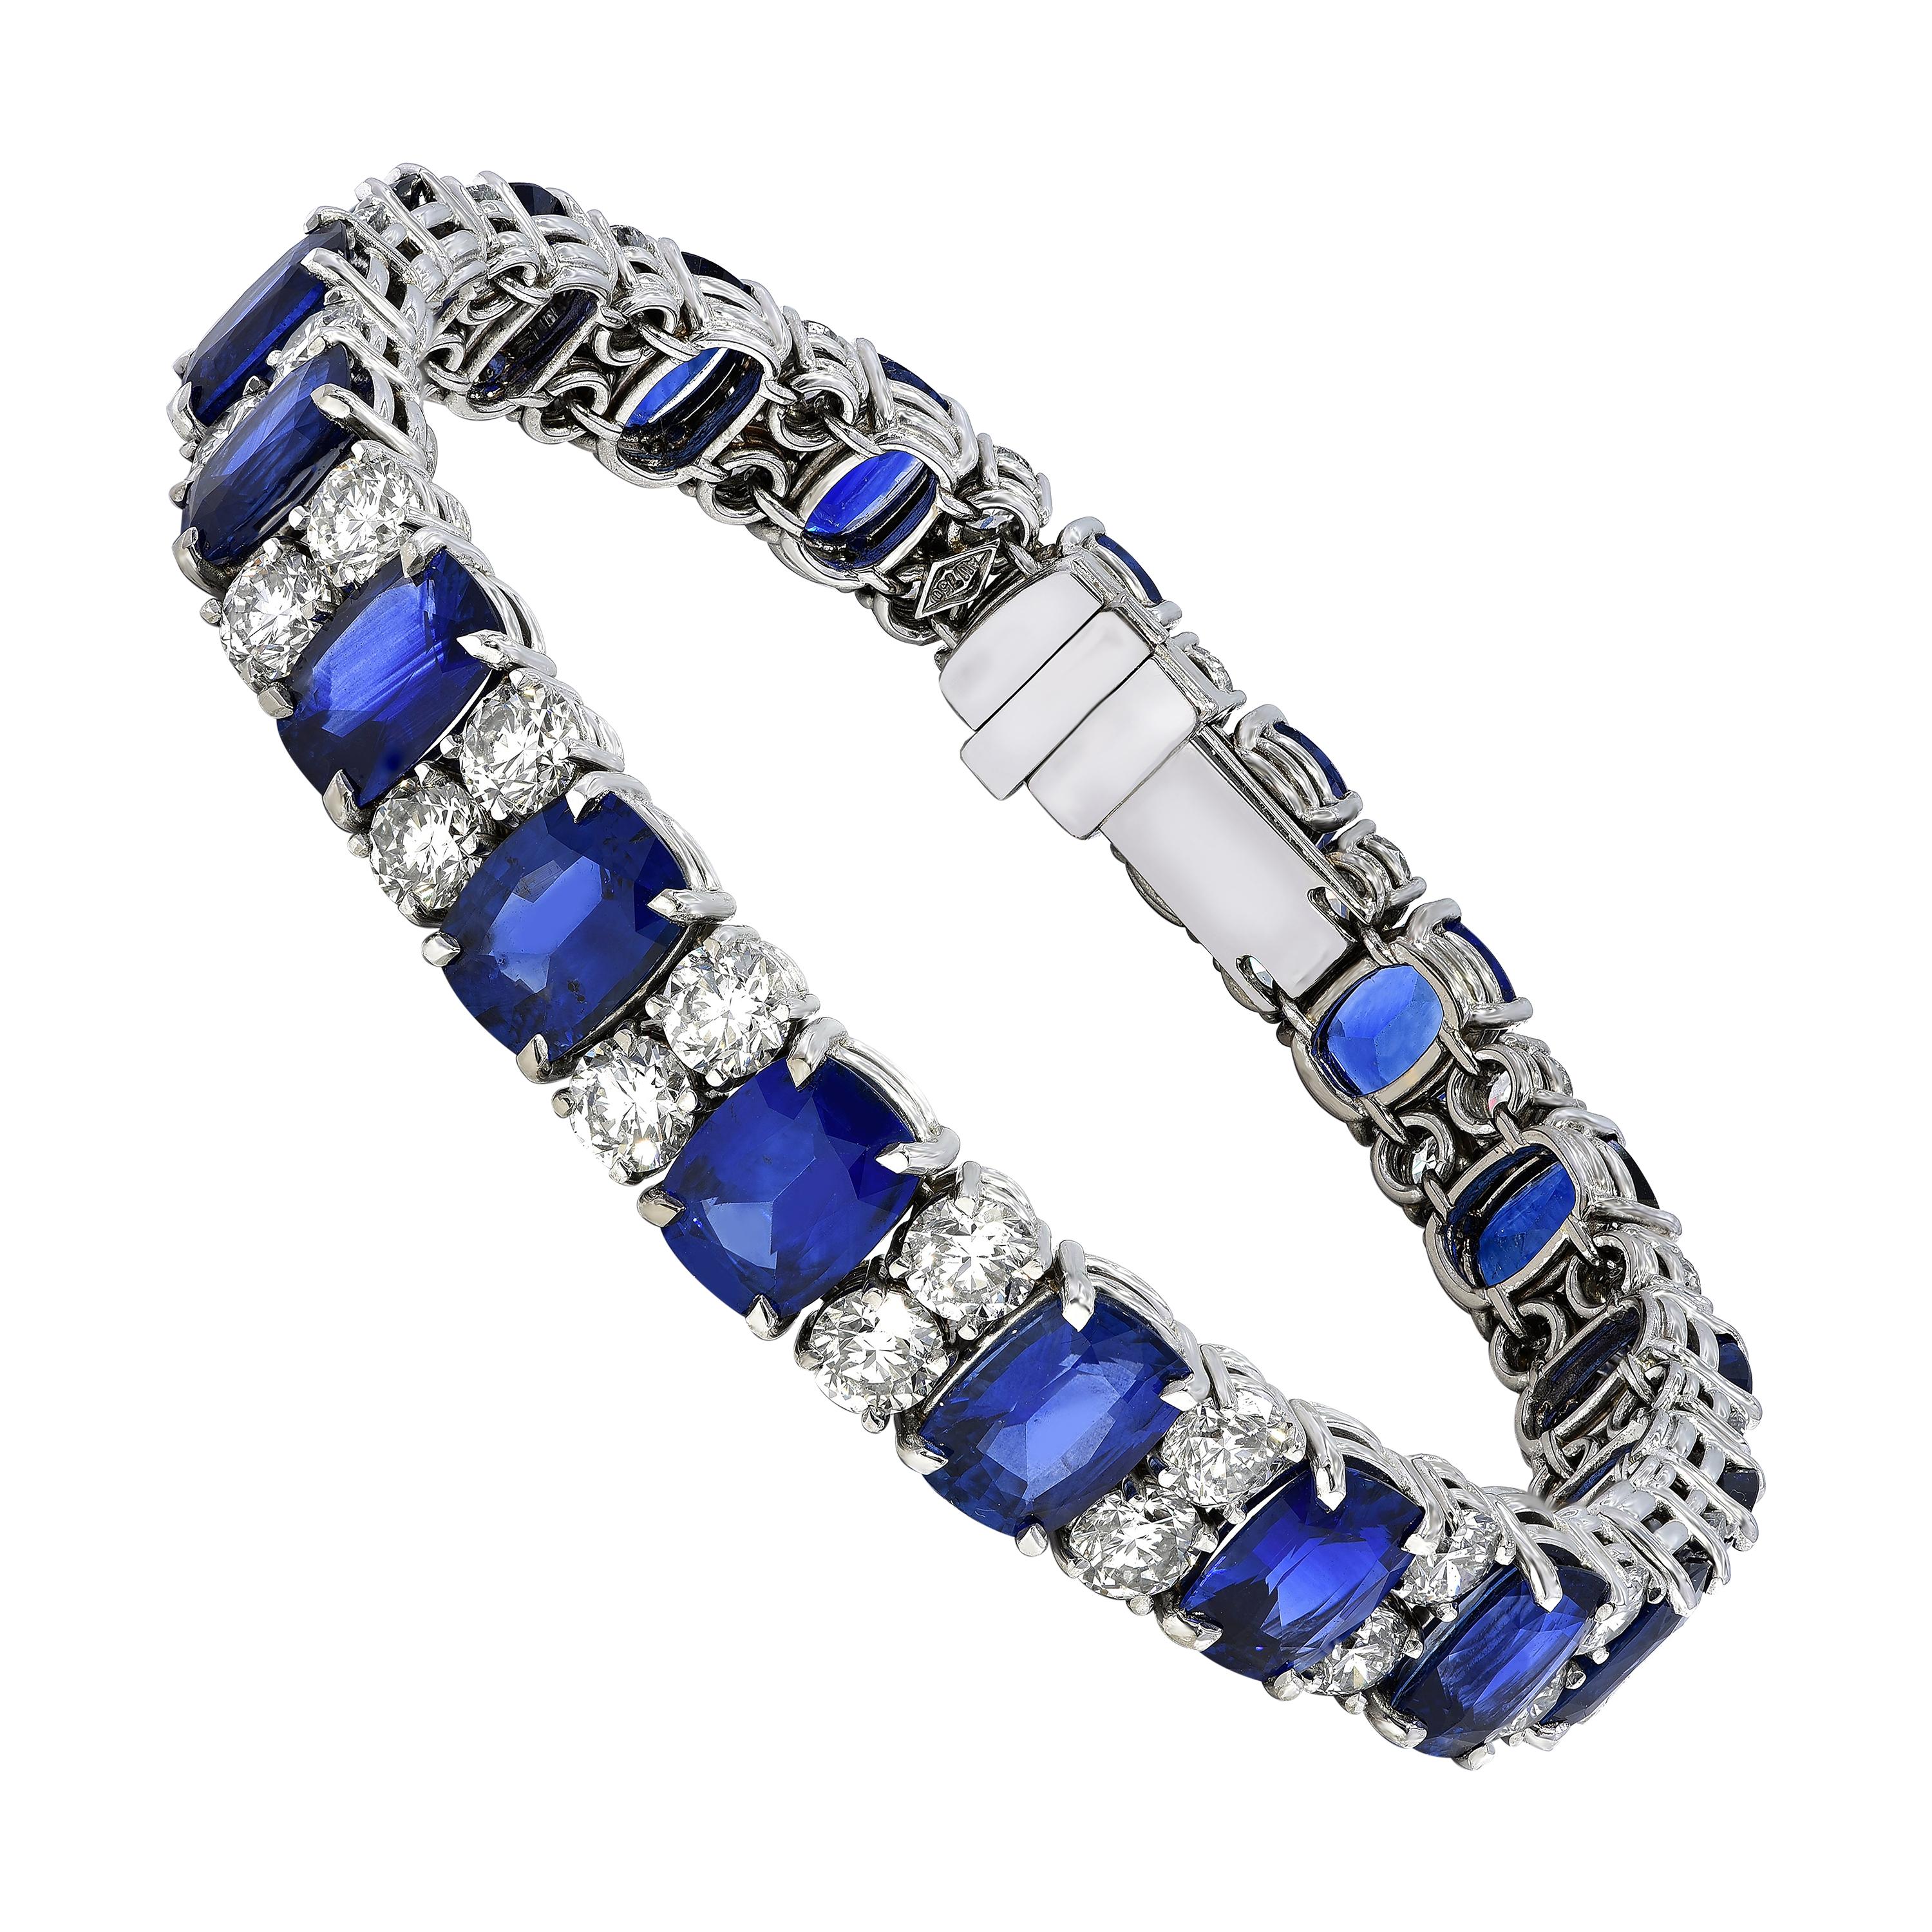 18kt White Gold Bracelet  27.33ct Sapphires, 9ct Diamonds, CGL Certificated For Sale